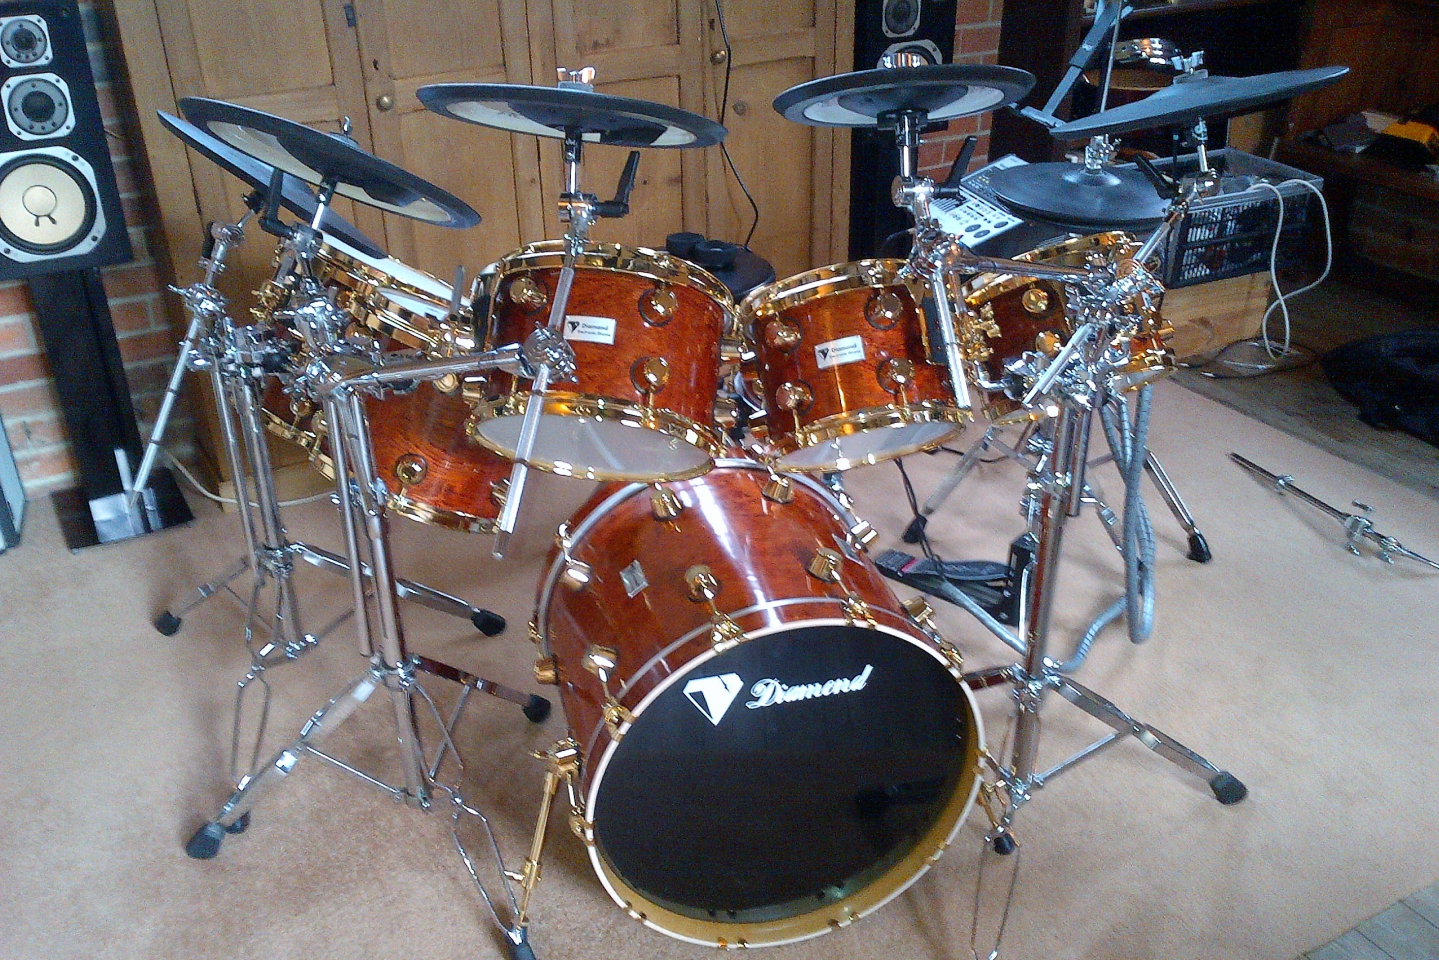 Picture of a drum kit chrome plated.